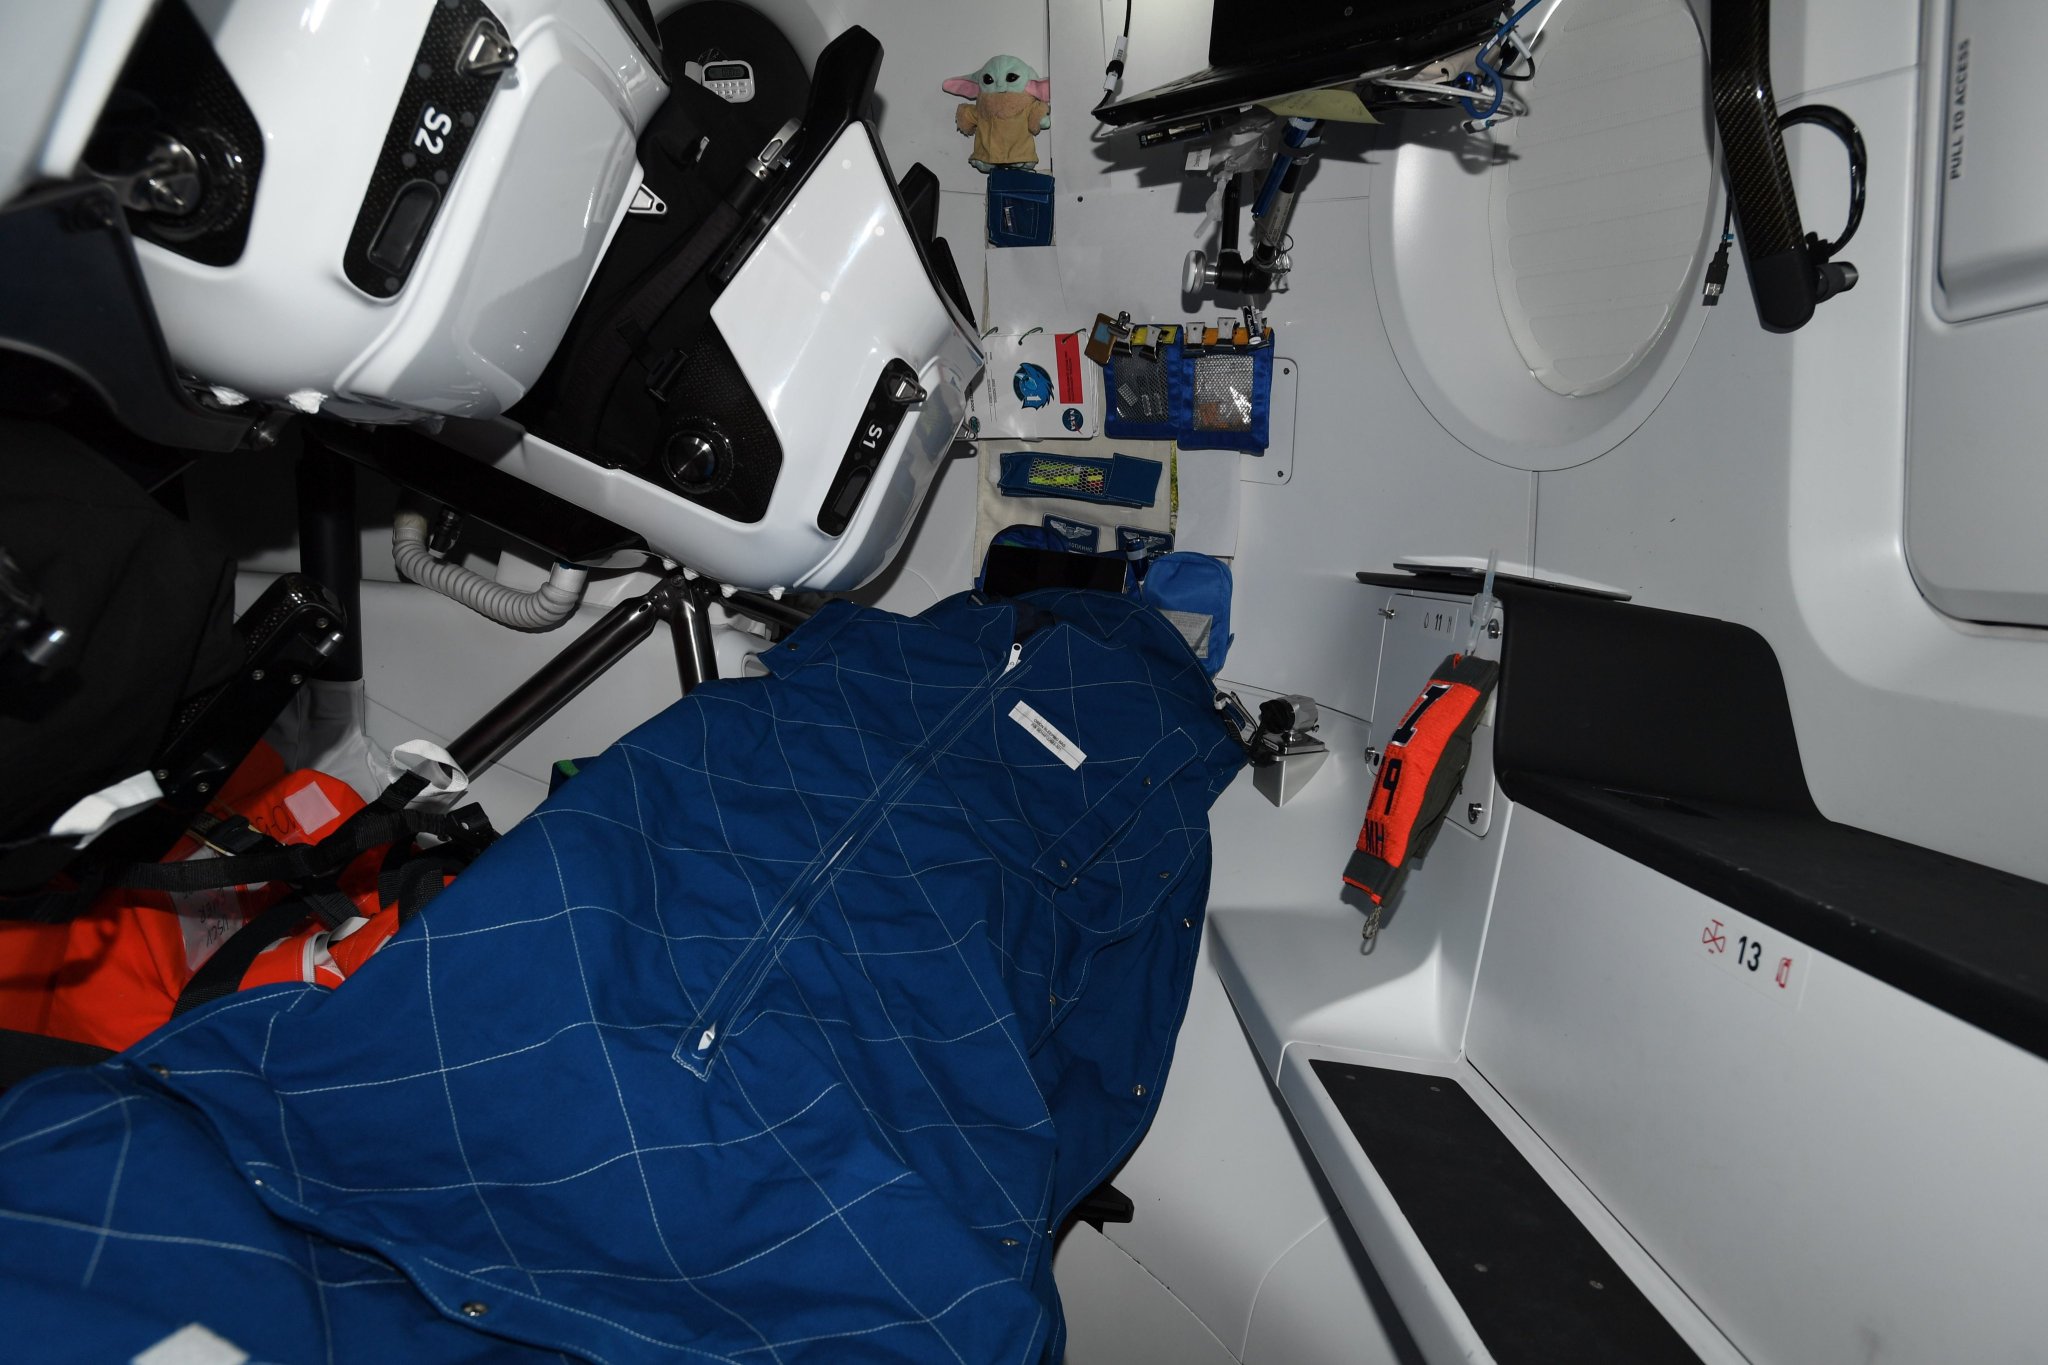 Crew sleeping space aboard the Crew Dragon Resilience spacecraft, docked to the International Space Station.